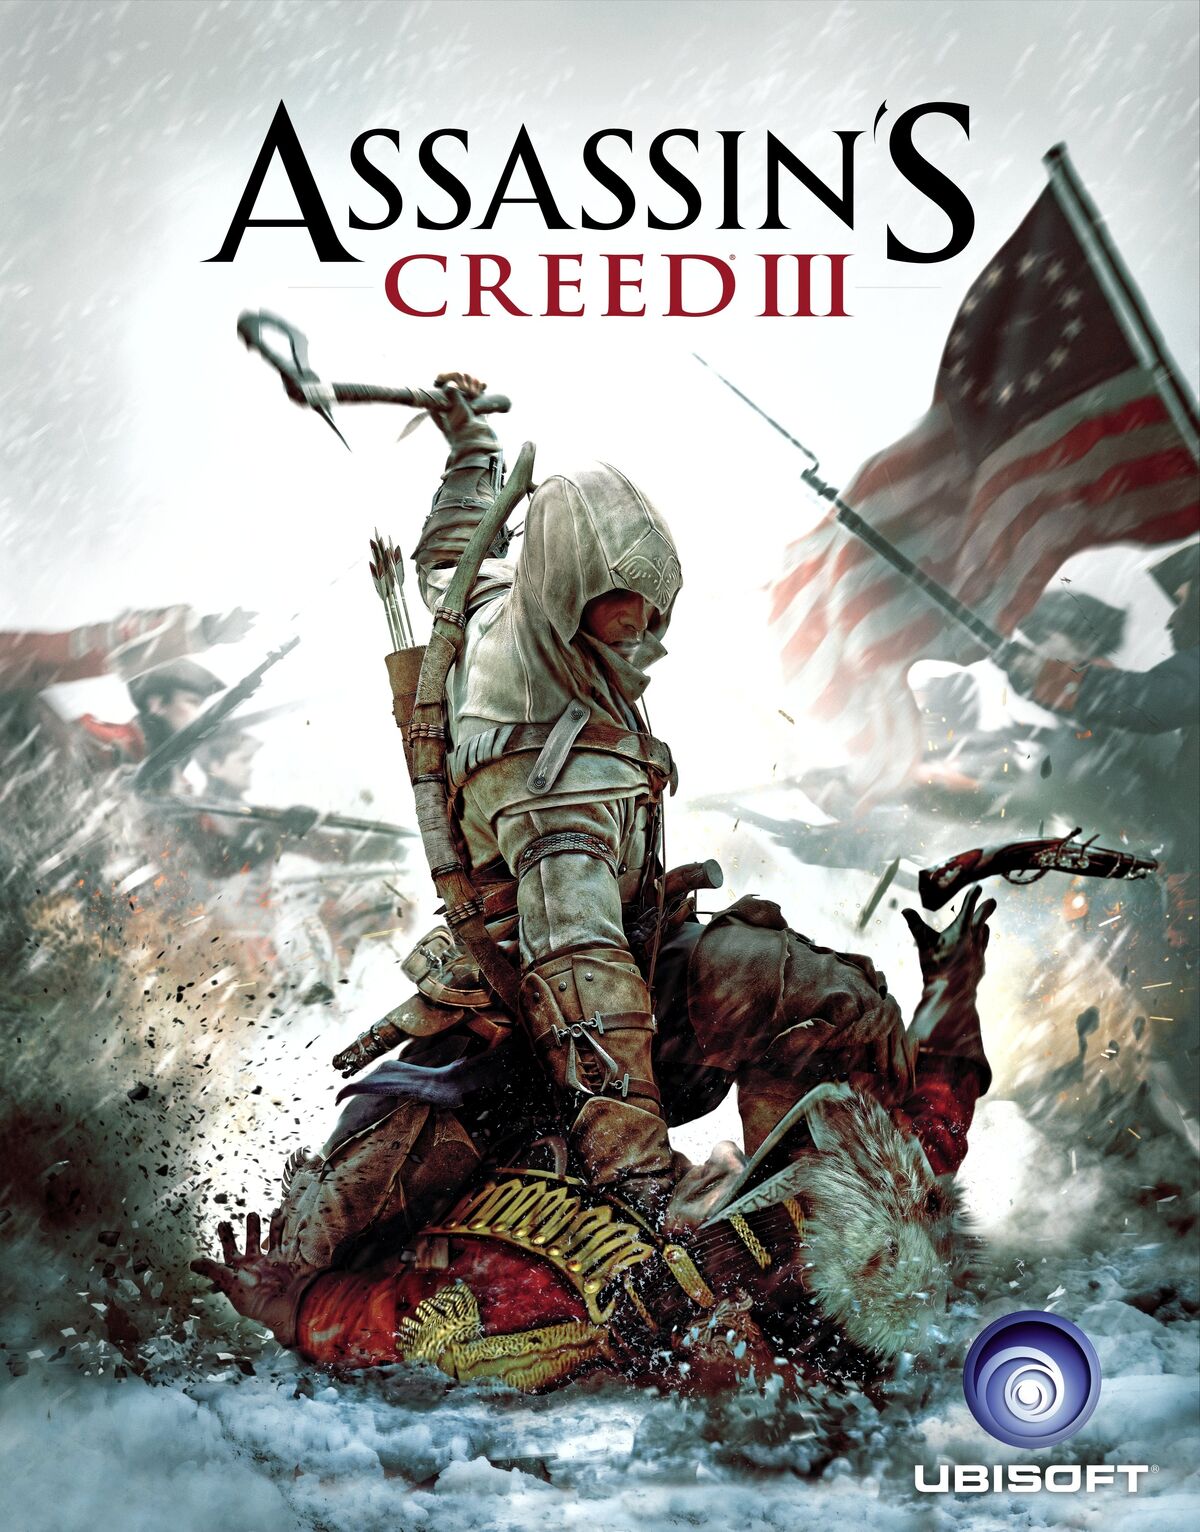 Assassin's Creed 3 Remastered Save Game + File Location [PC] 